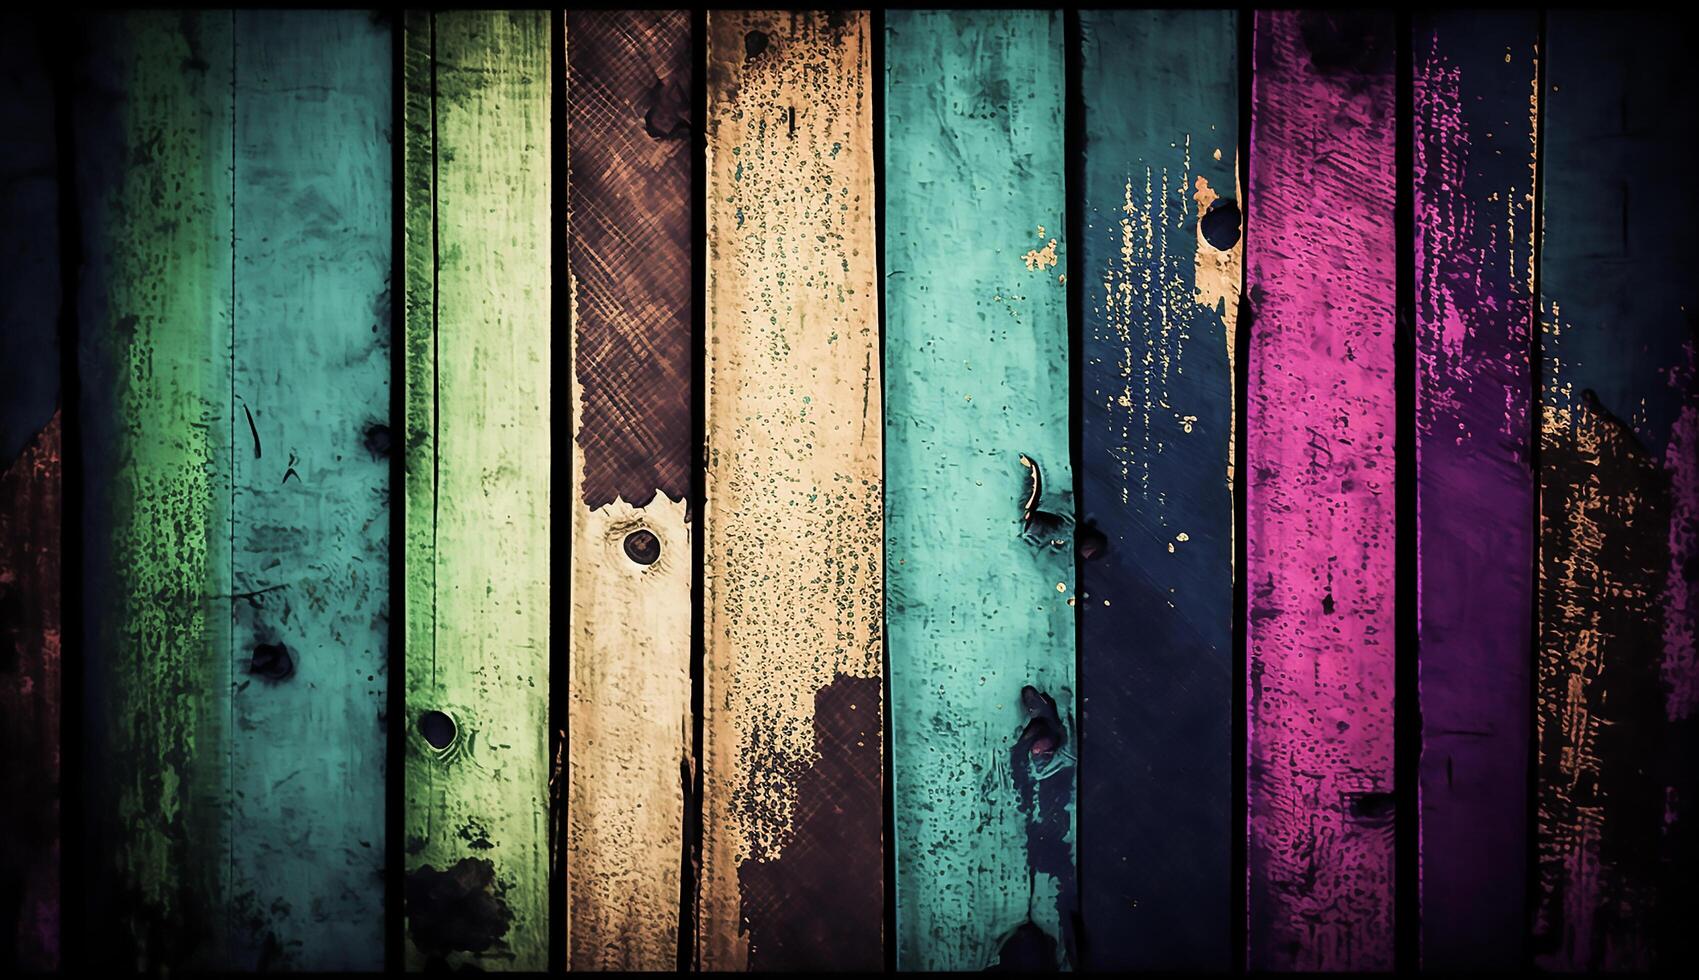 Old, grungy, colorful wood background, photo